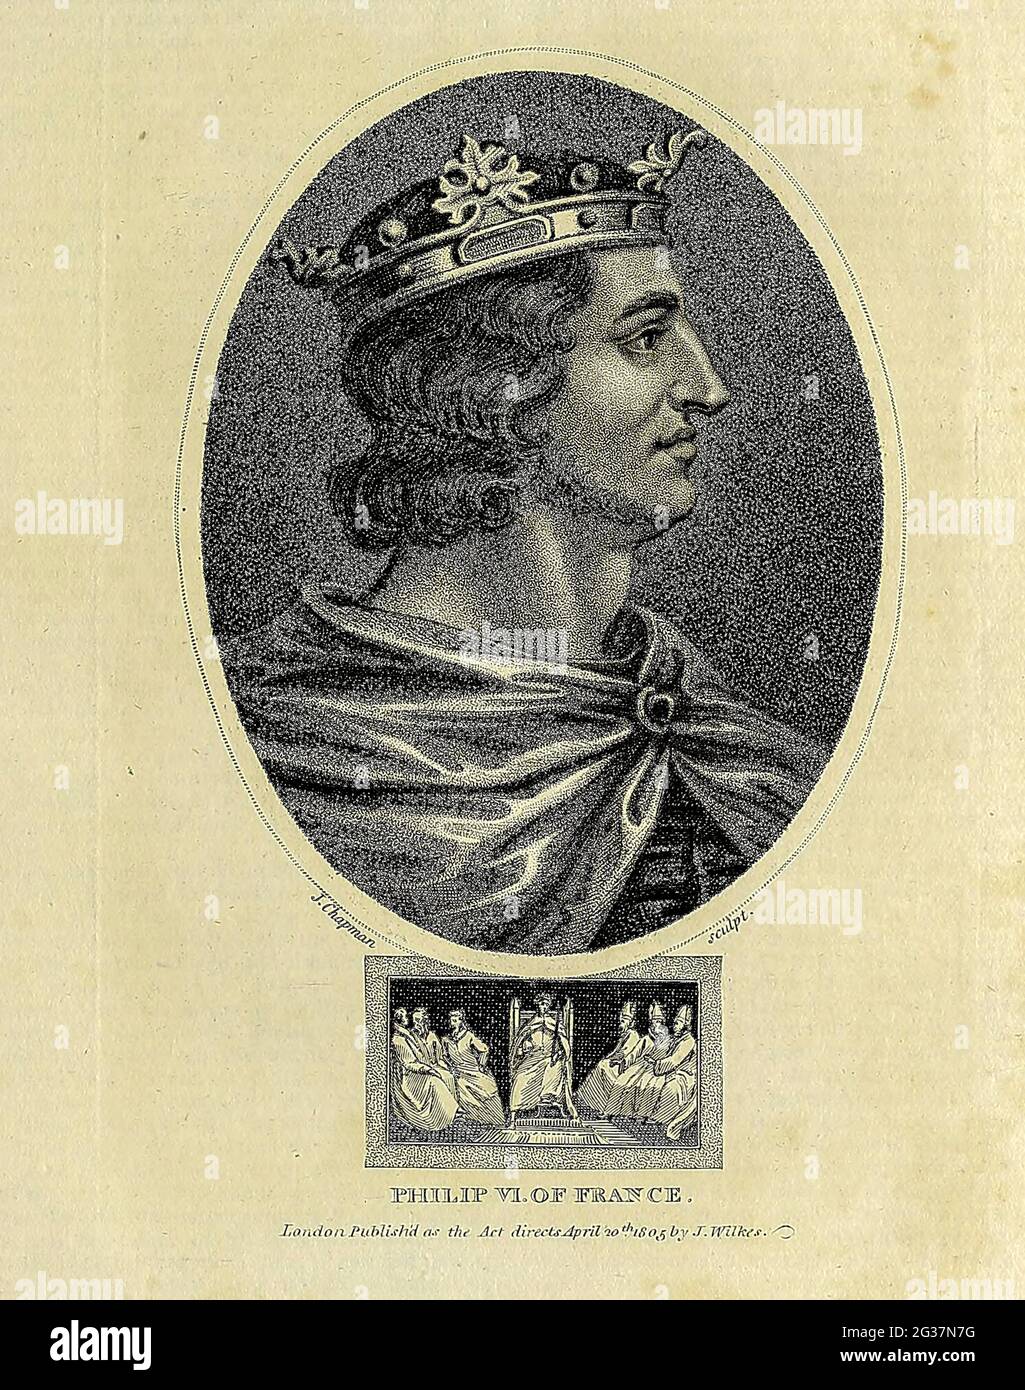 Philip VI of France. Philip VI (French: Philippe; 17 November 1293 – 22 August 1350), called the Fortunate and of Valois, was the first King of France from the House of Valois, reigning from 1328 until his death. Copperplate engraving From the Encyclopaedia Londinensis or, Universal dictionary of arts, sciences, and literature; Volume VII;  Edited by Wilkes, John. Published in London in 1810 Stock Photo